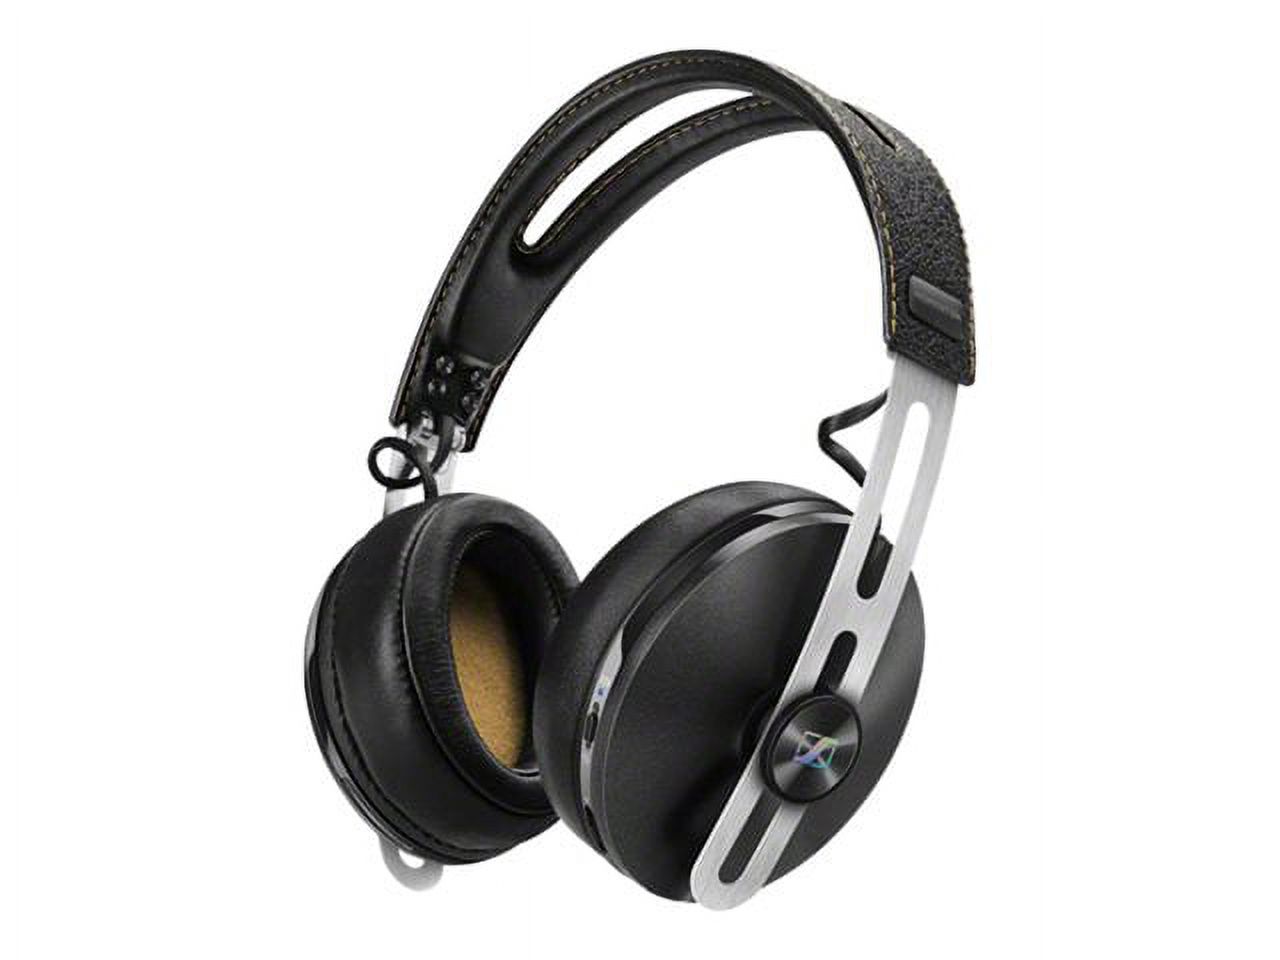 Sennheiser MOMENTUM Wireless Bluetooth Over-Ear Headphones With Active Noise Cancellation - image 3 of 6